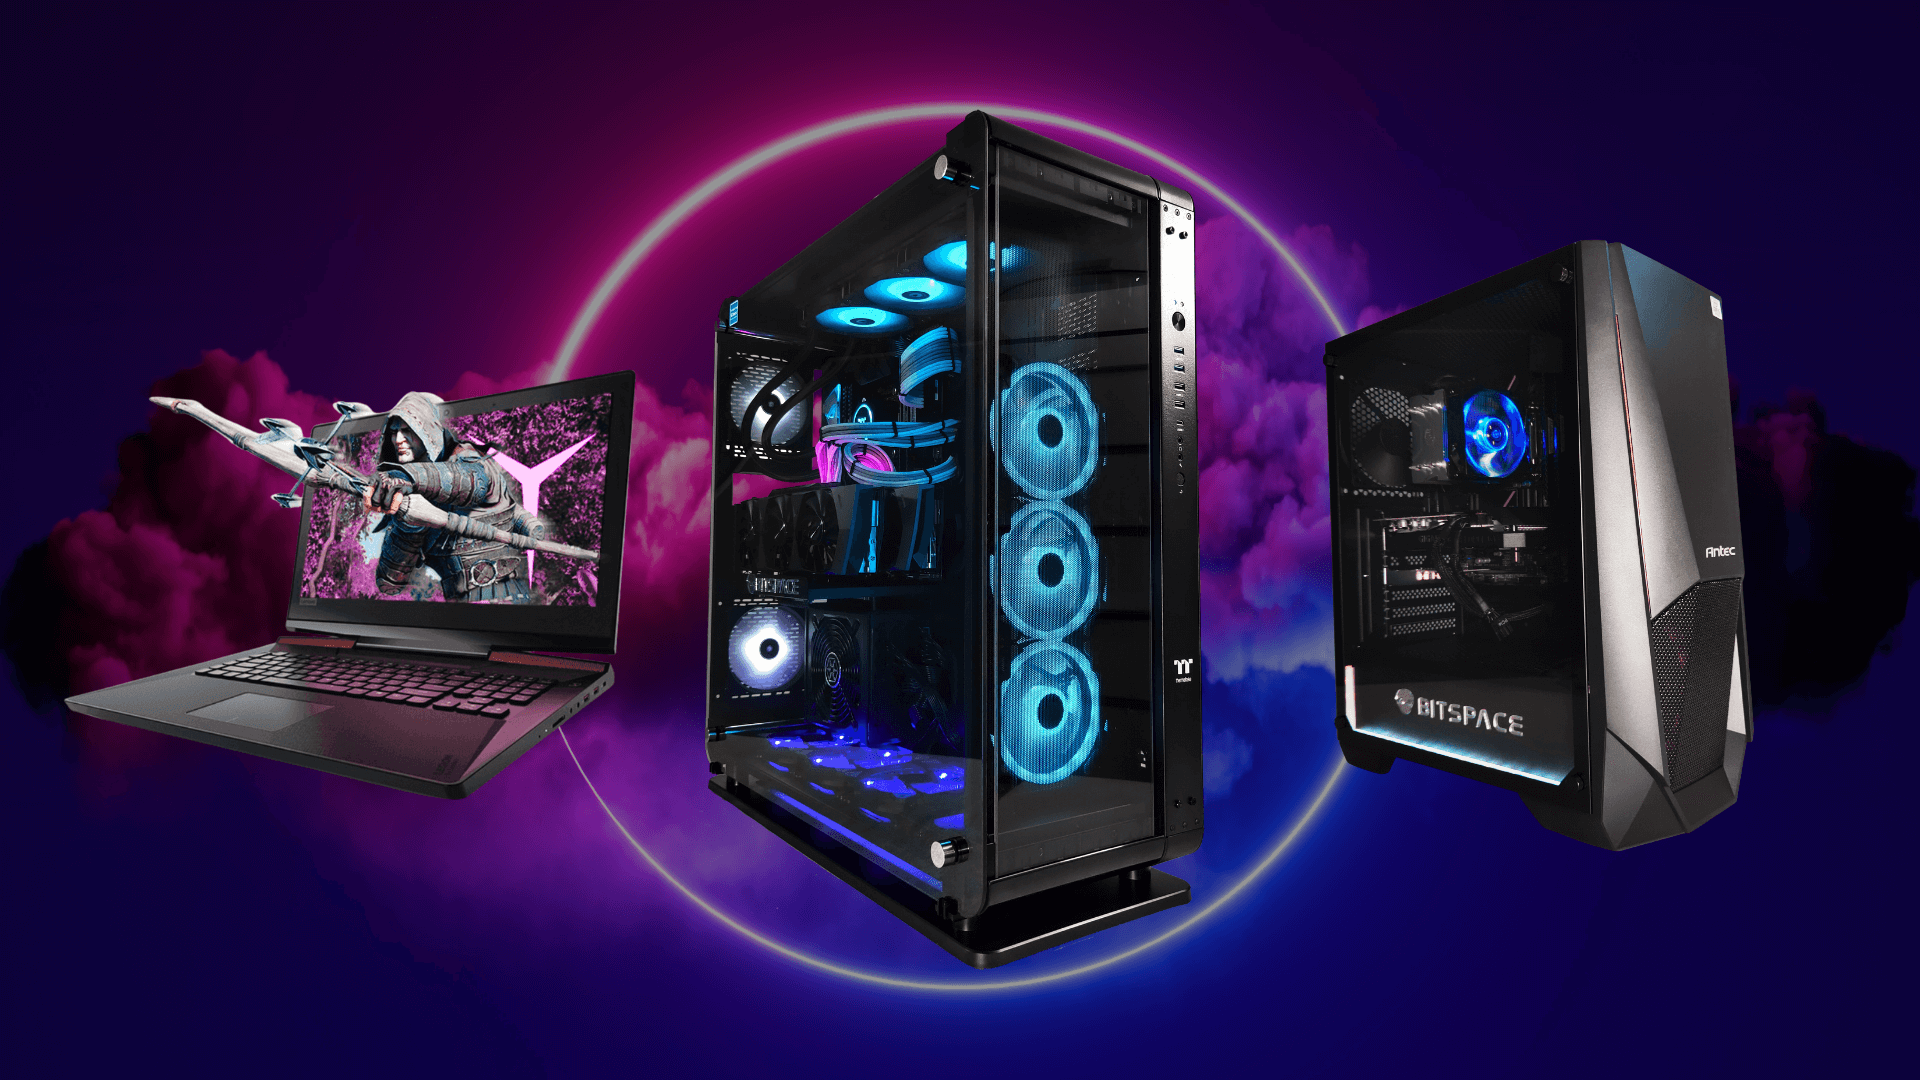 Bitspace Gaming PC and Gaming Laptop Collection